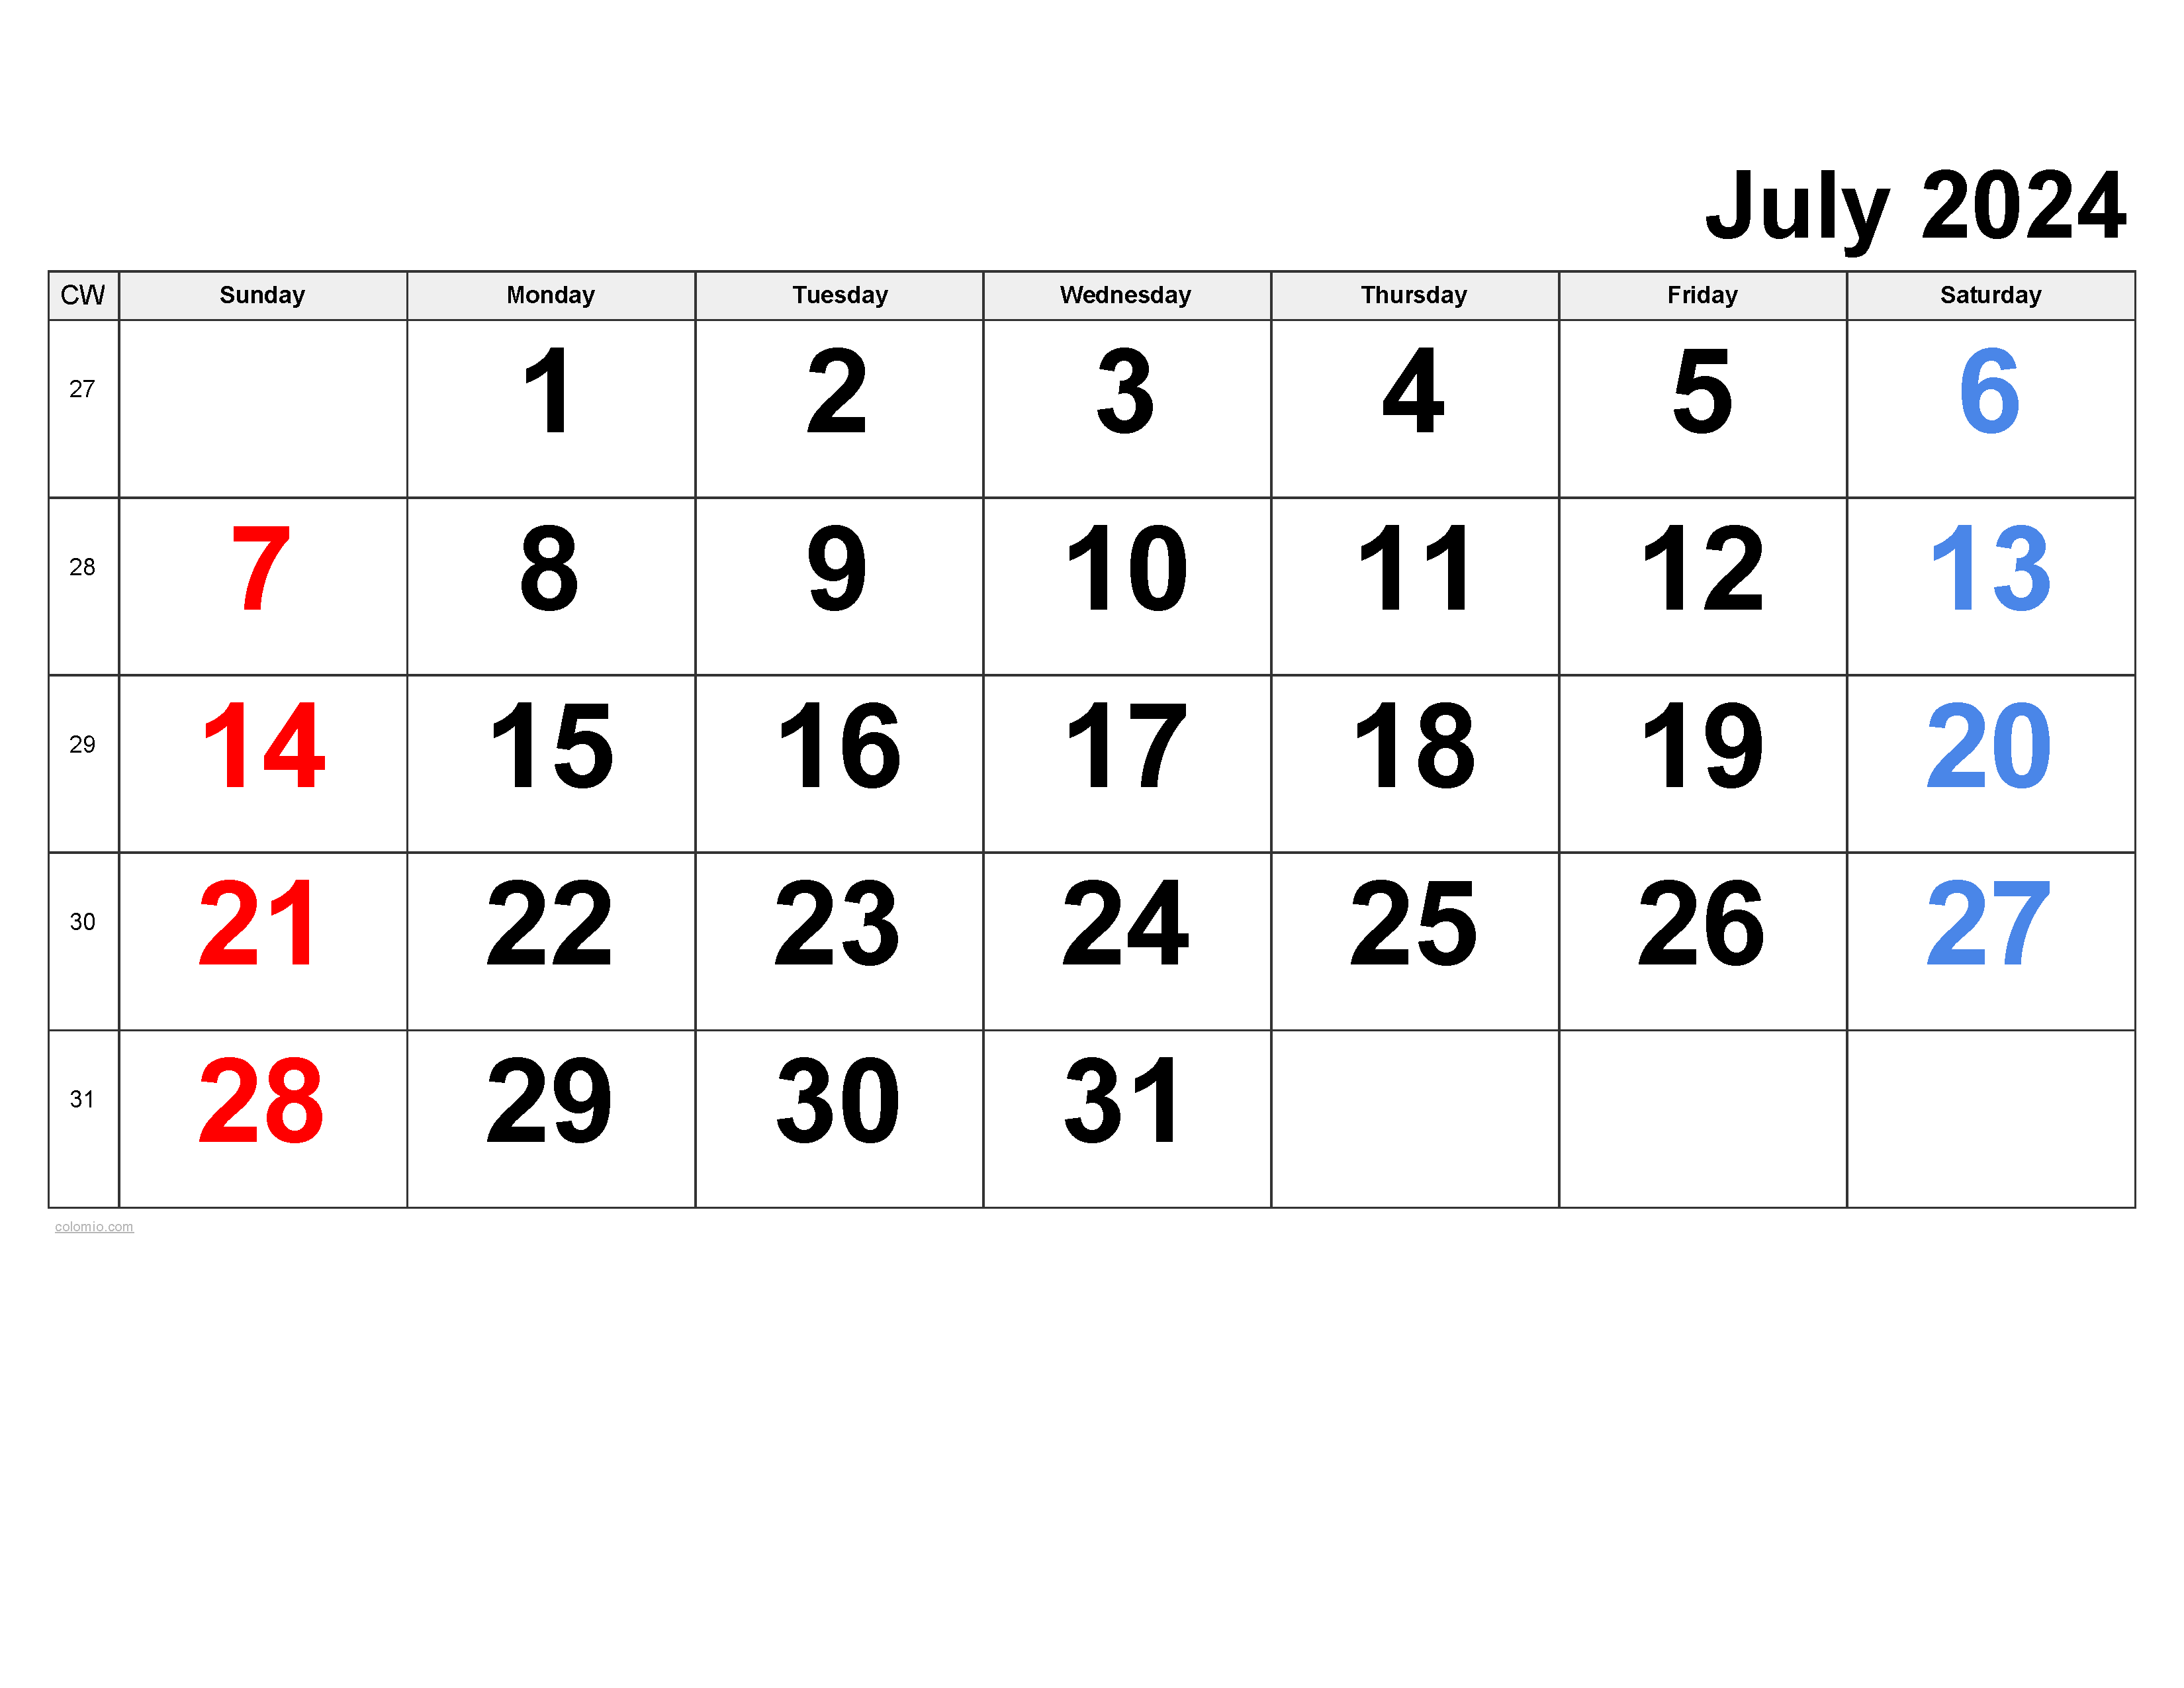 July 2024 Calendar | Free Printable Pdf, Xls And Png throughout July 20 2024 Calendar